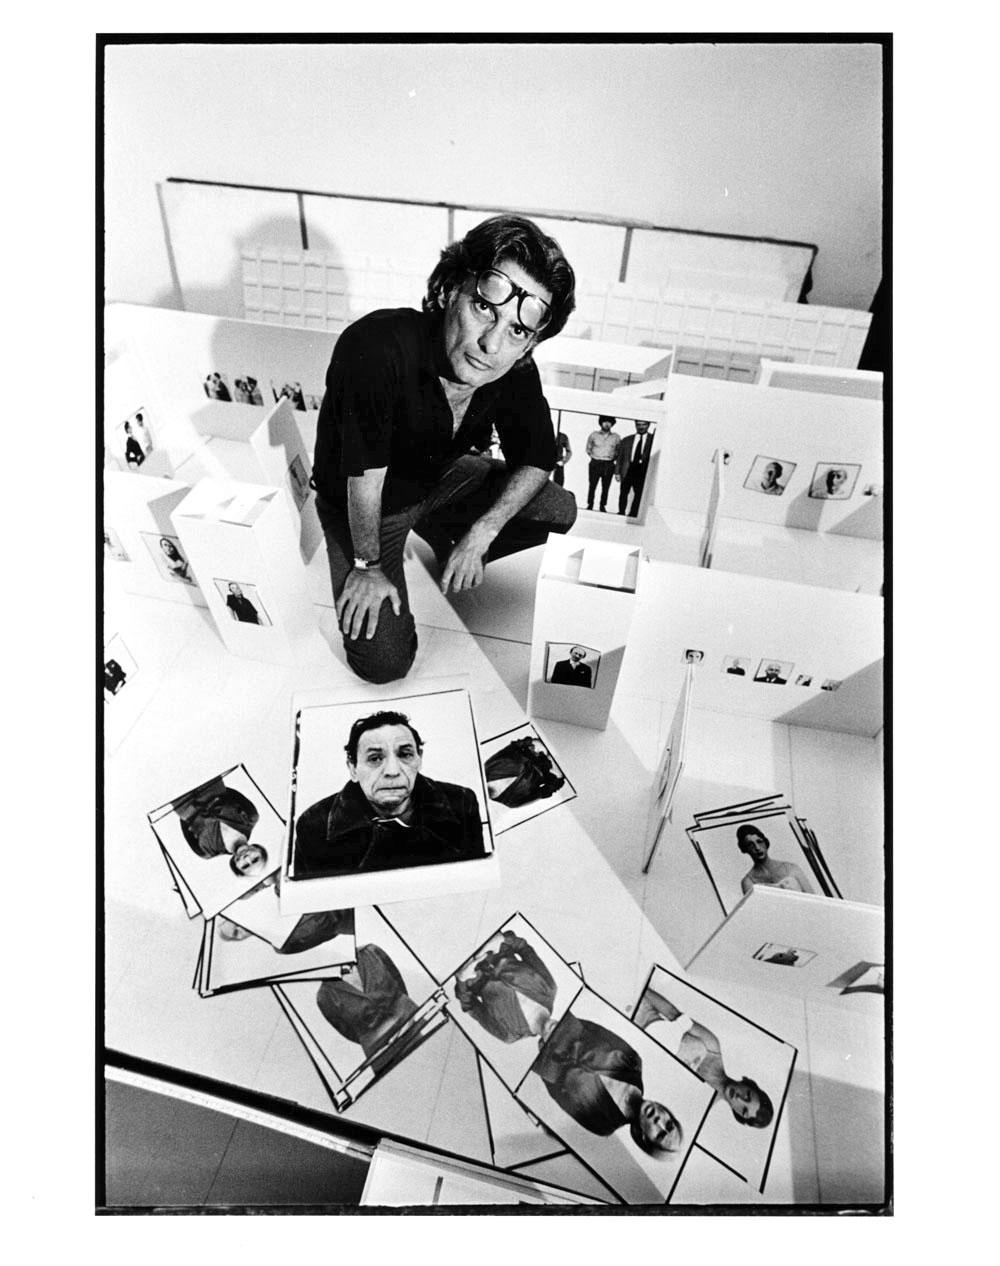 Jack Mitchell Black and White Photograph - Photographer Richard Avedon planning his exhibition at the Marlborough Gallery